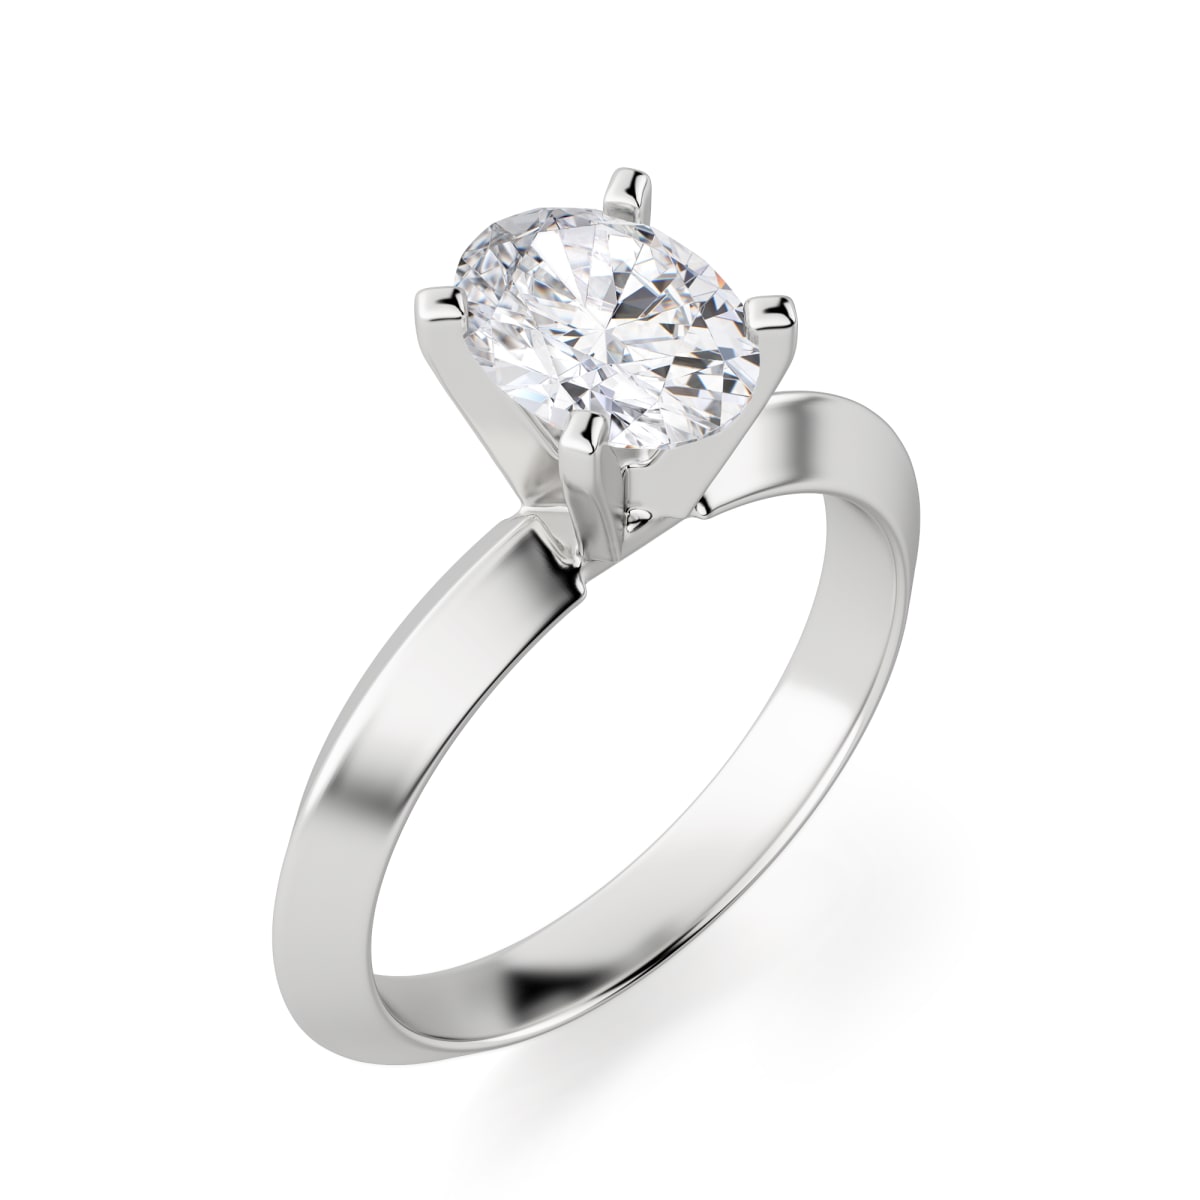 Knife-Edge Classic Engagement Ring With 3.00 ct Oval Center DEW, Ring Size 5.75, 14K White Gold, Nexus Diamond Alternative